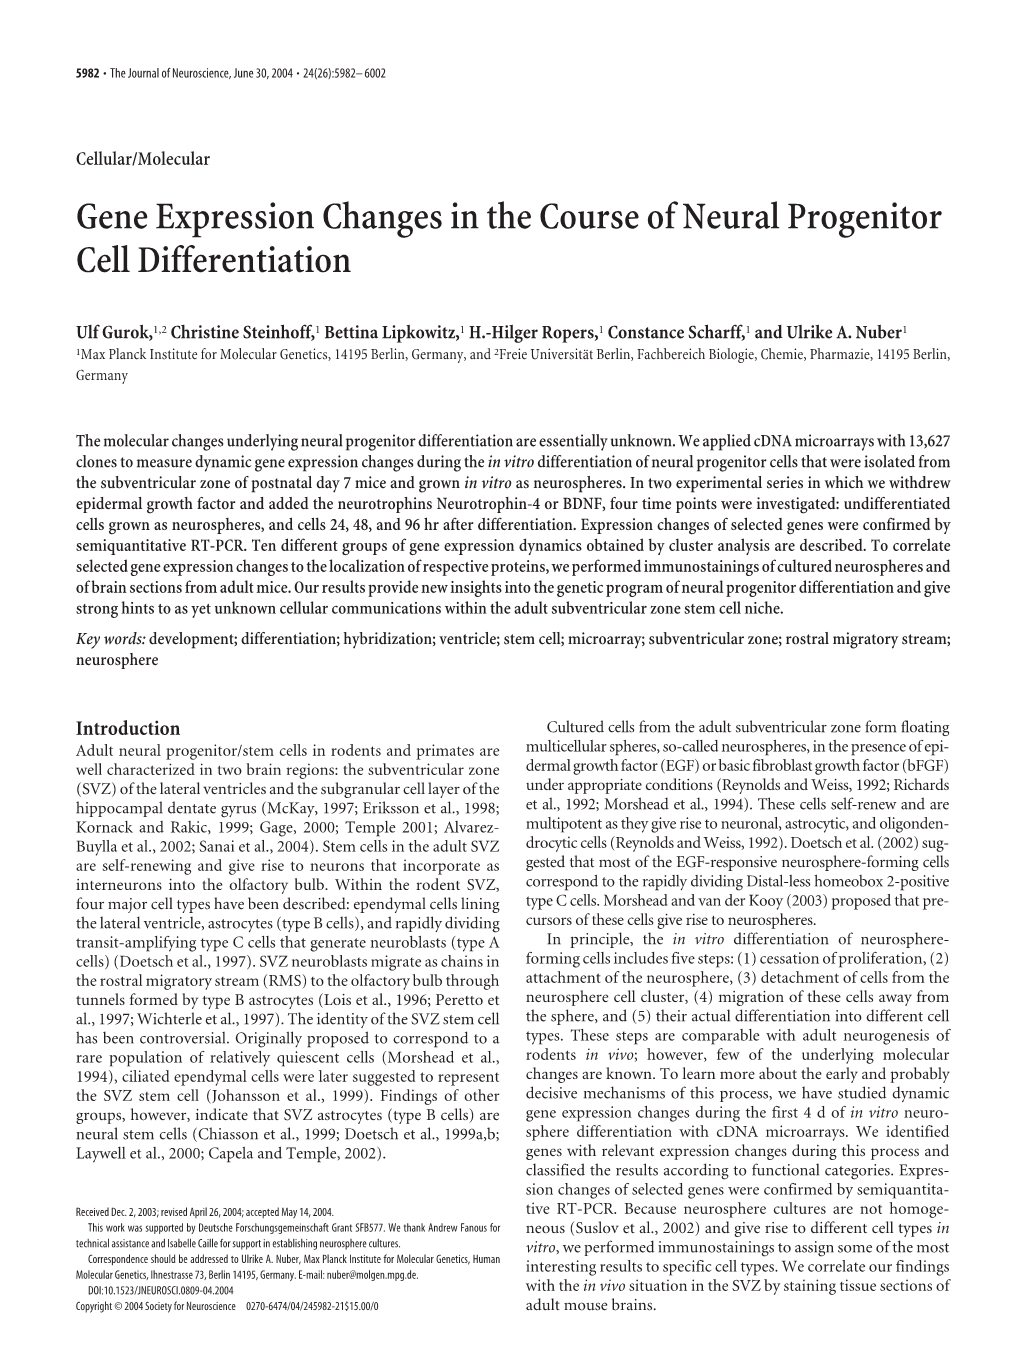 Gene Expression Changes in the Course of Neural Progenitor Cell Differentiation